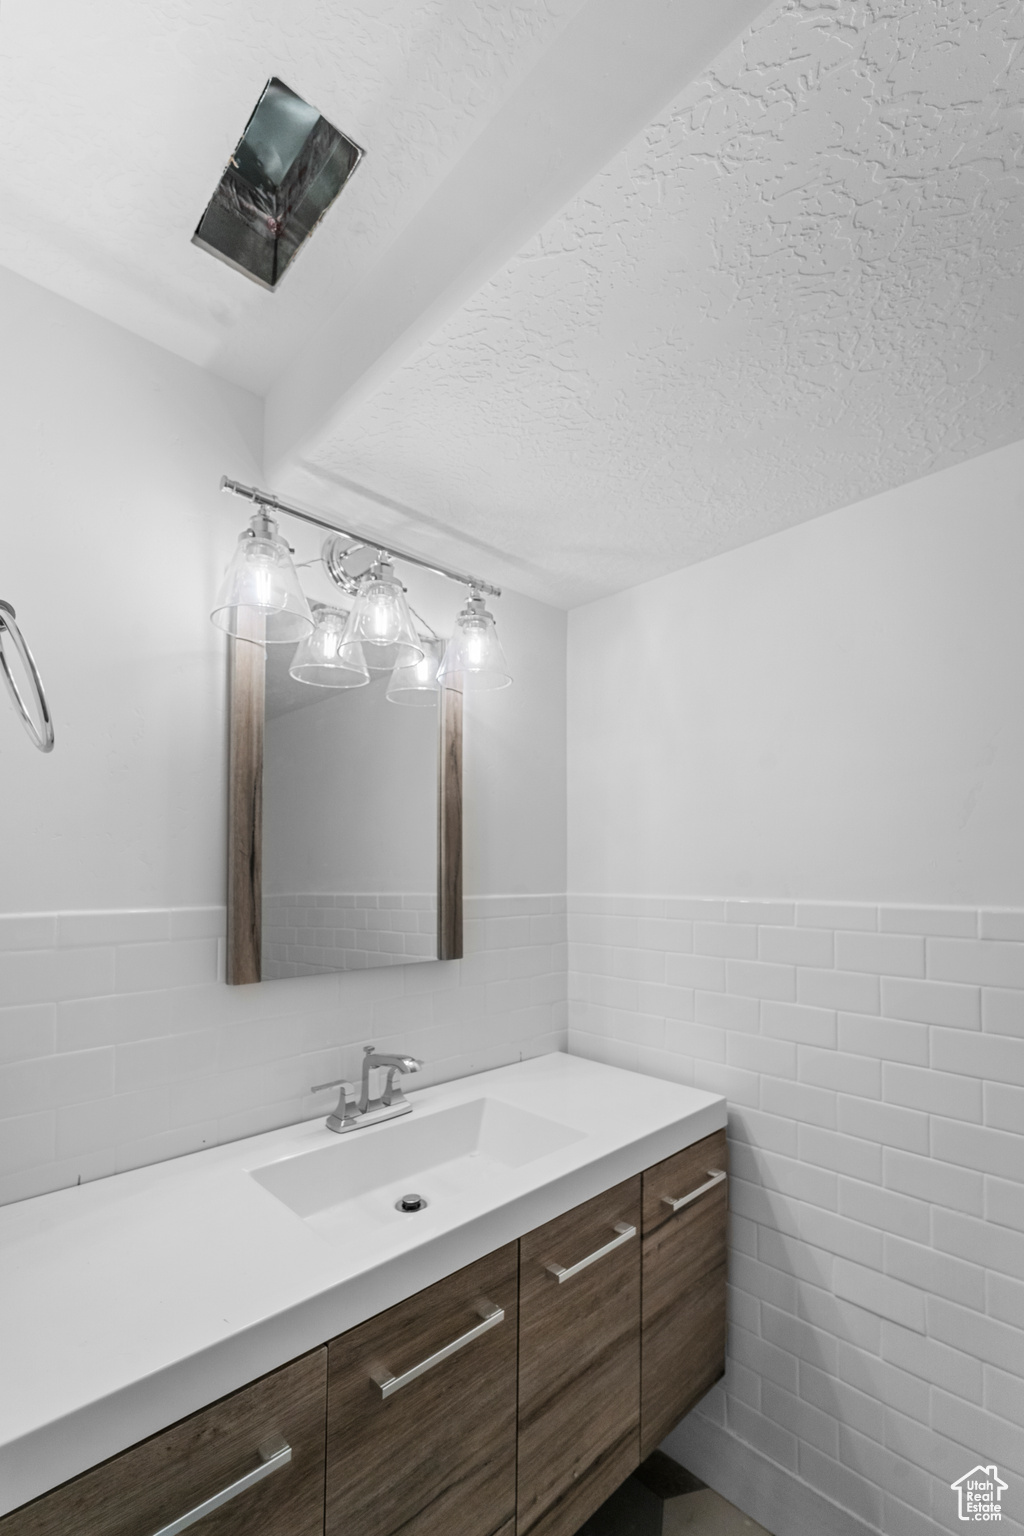 Bathroom featuring tile walls, a textured ceiling, and vanity